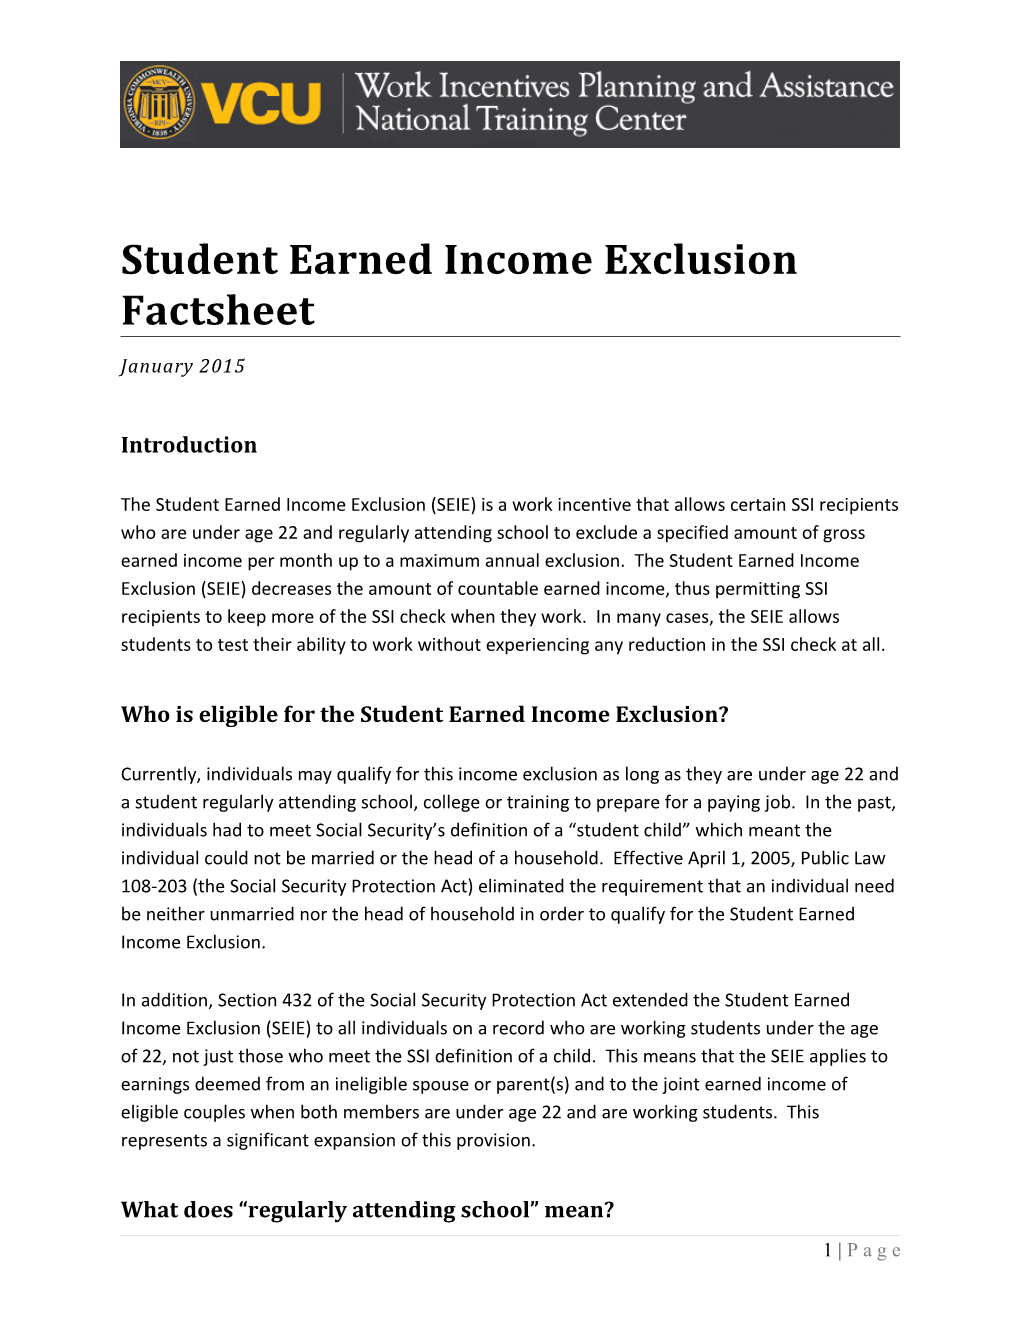 Who Is Eligible for the Student Earned Income Exclusion?